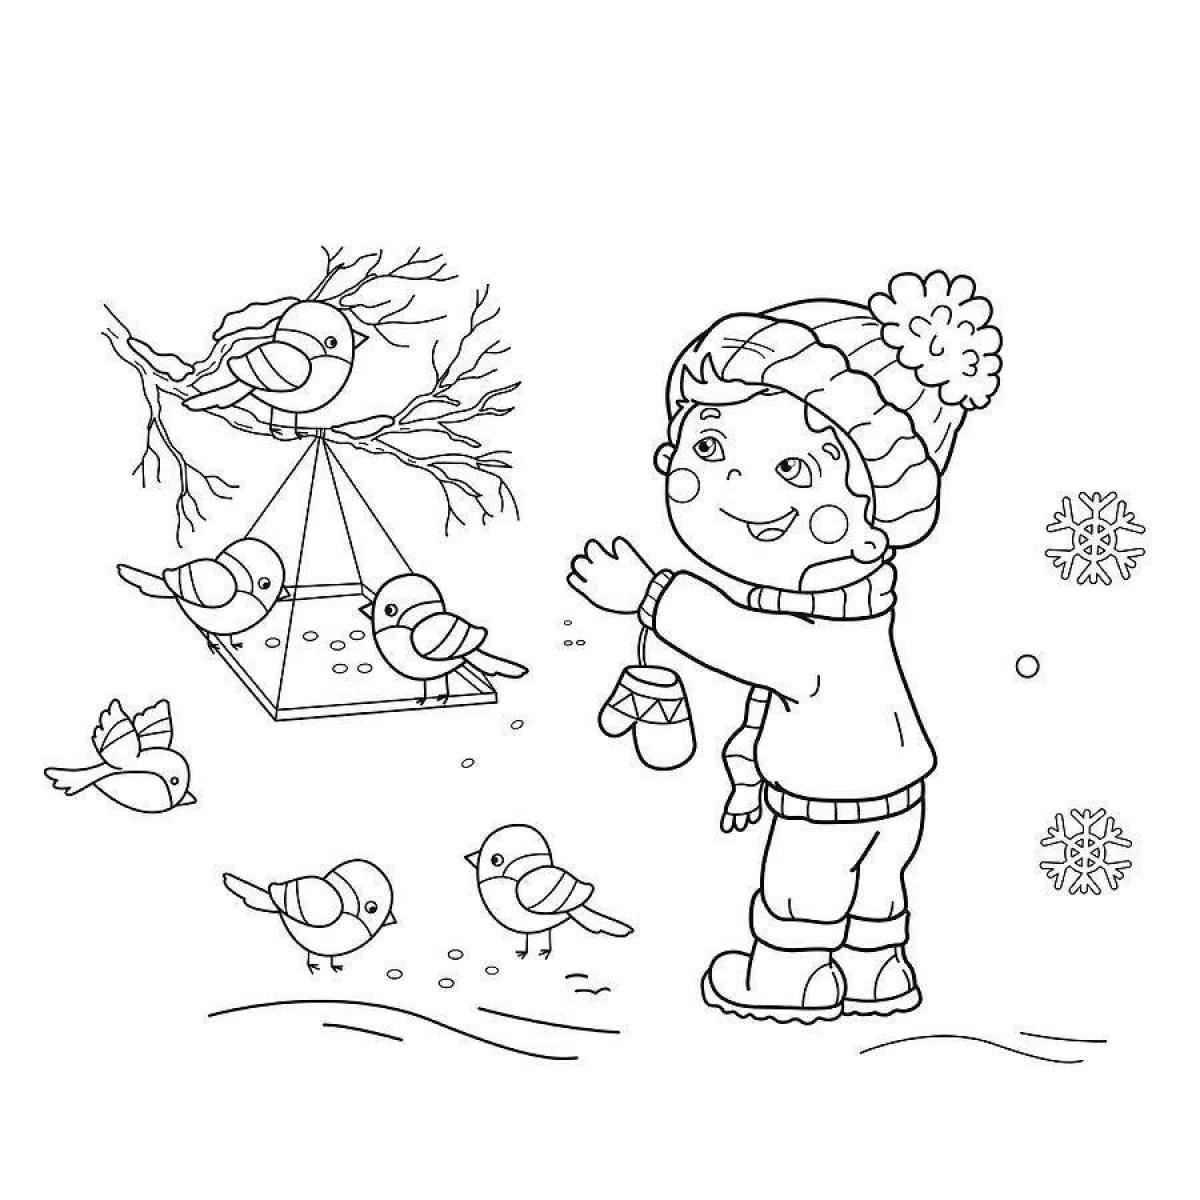 Cute coloring pages signs of winter for kids